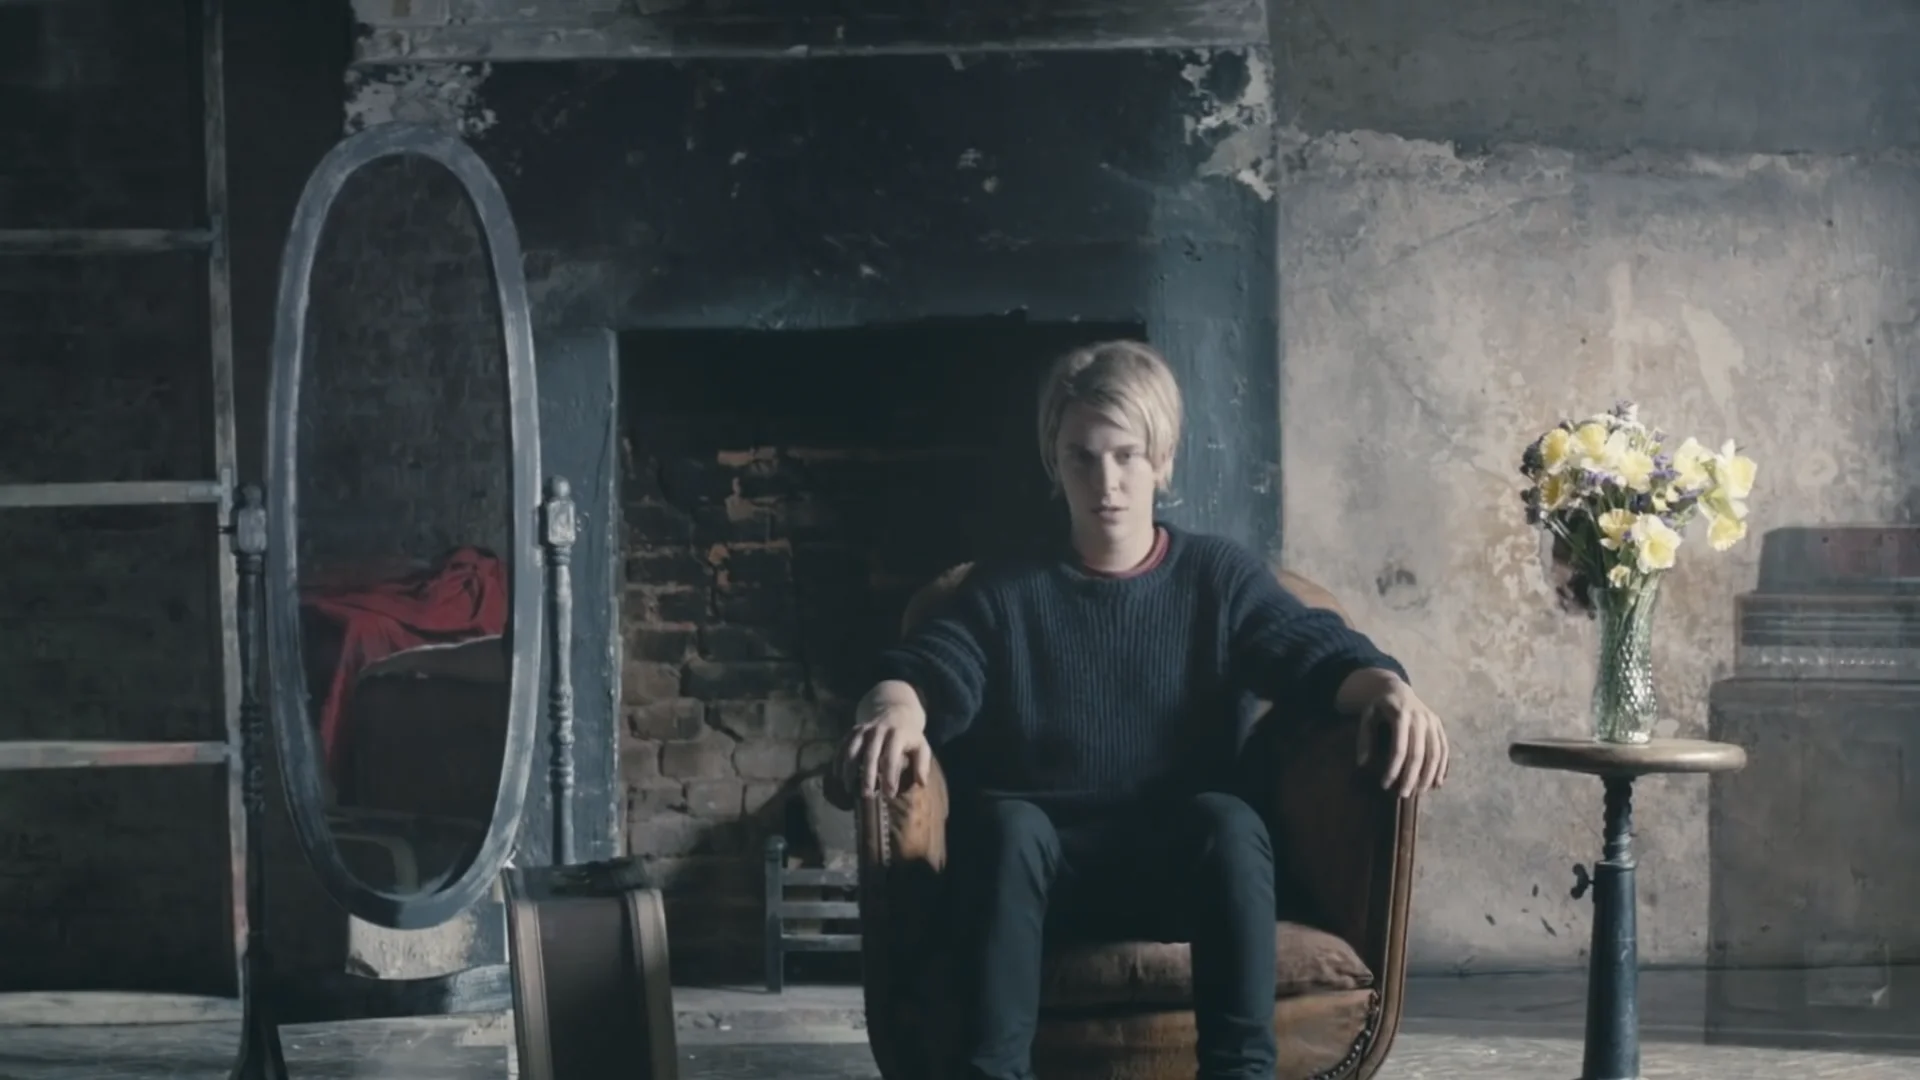 Image gallery for Tom Odell: Another Love (Music Video) (2012